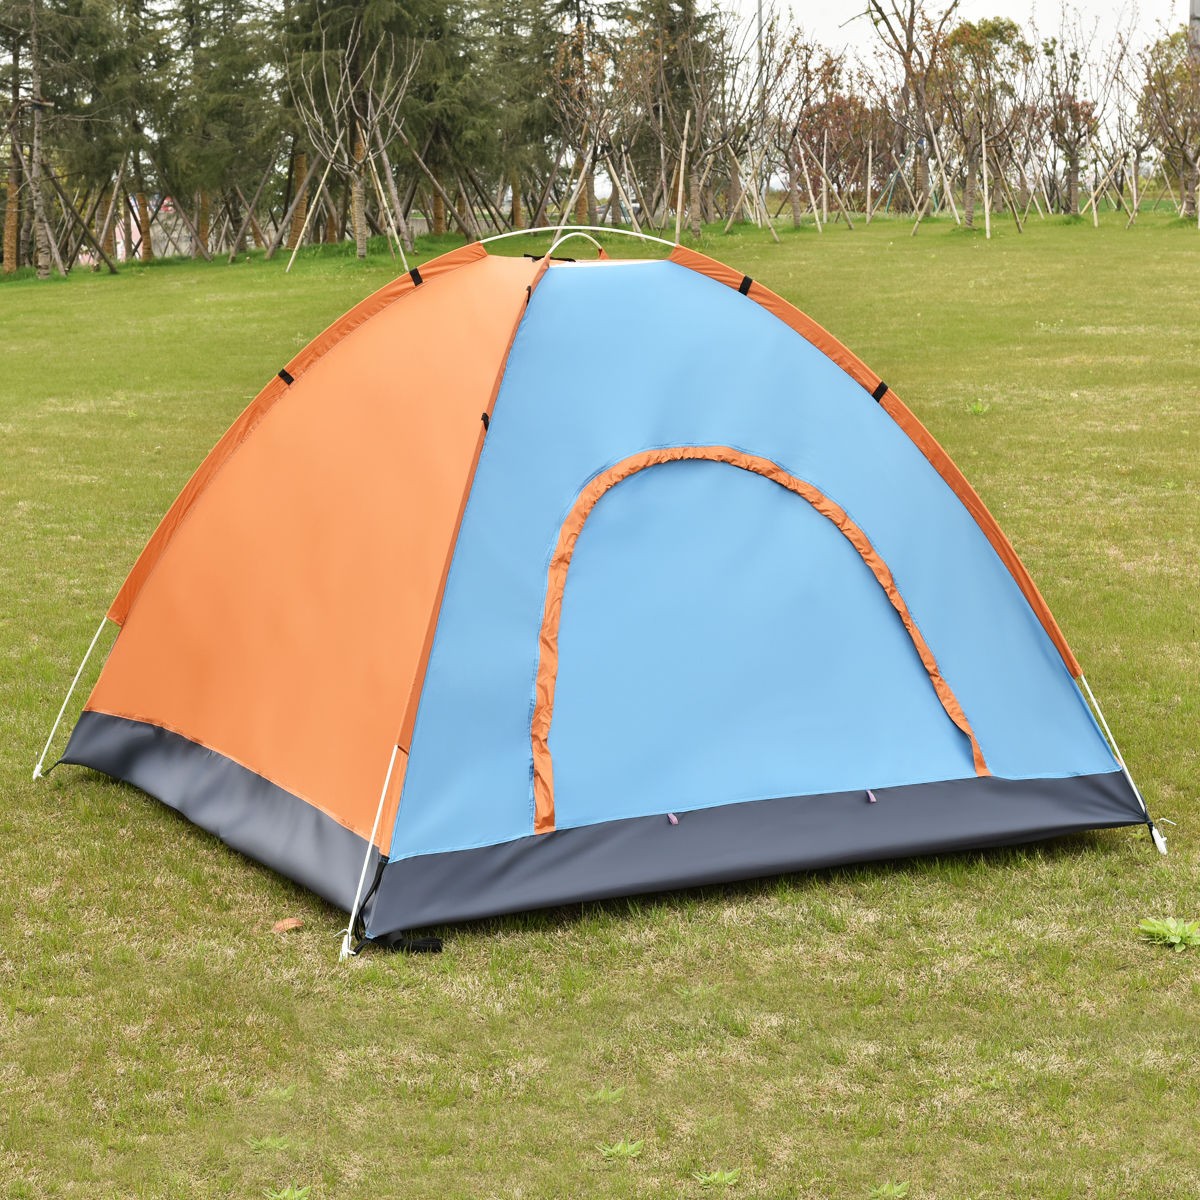 2 - 3 Persons Colorful Waterproof Camping Tent